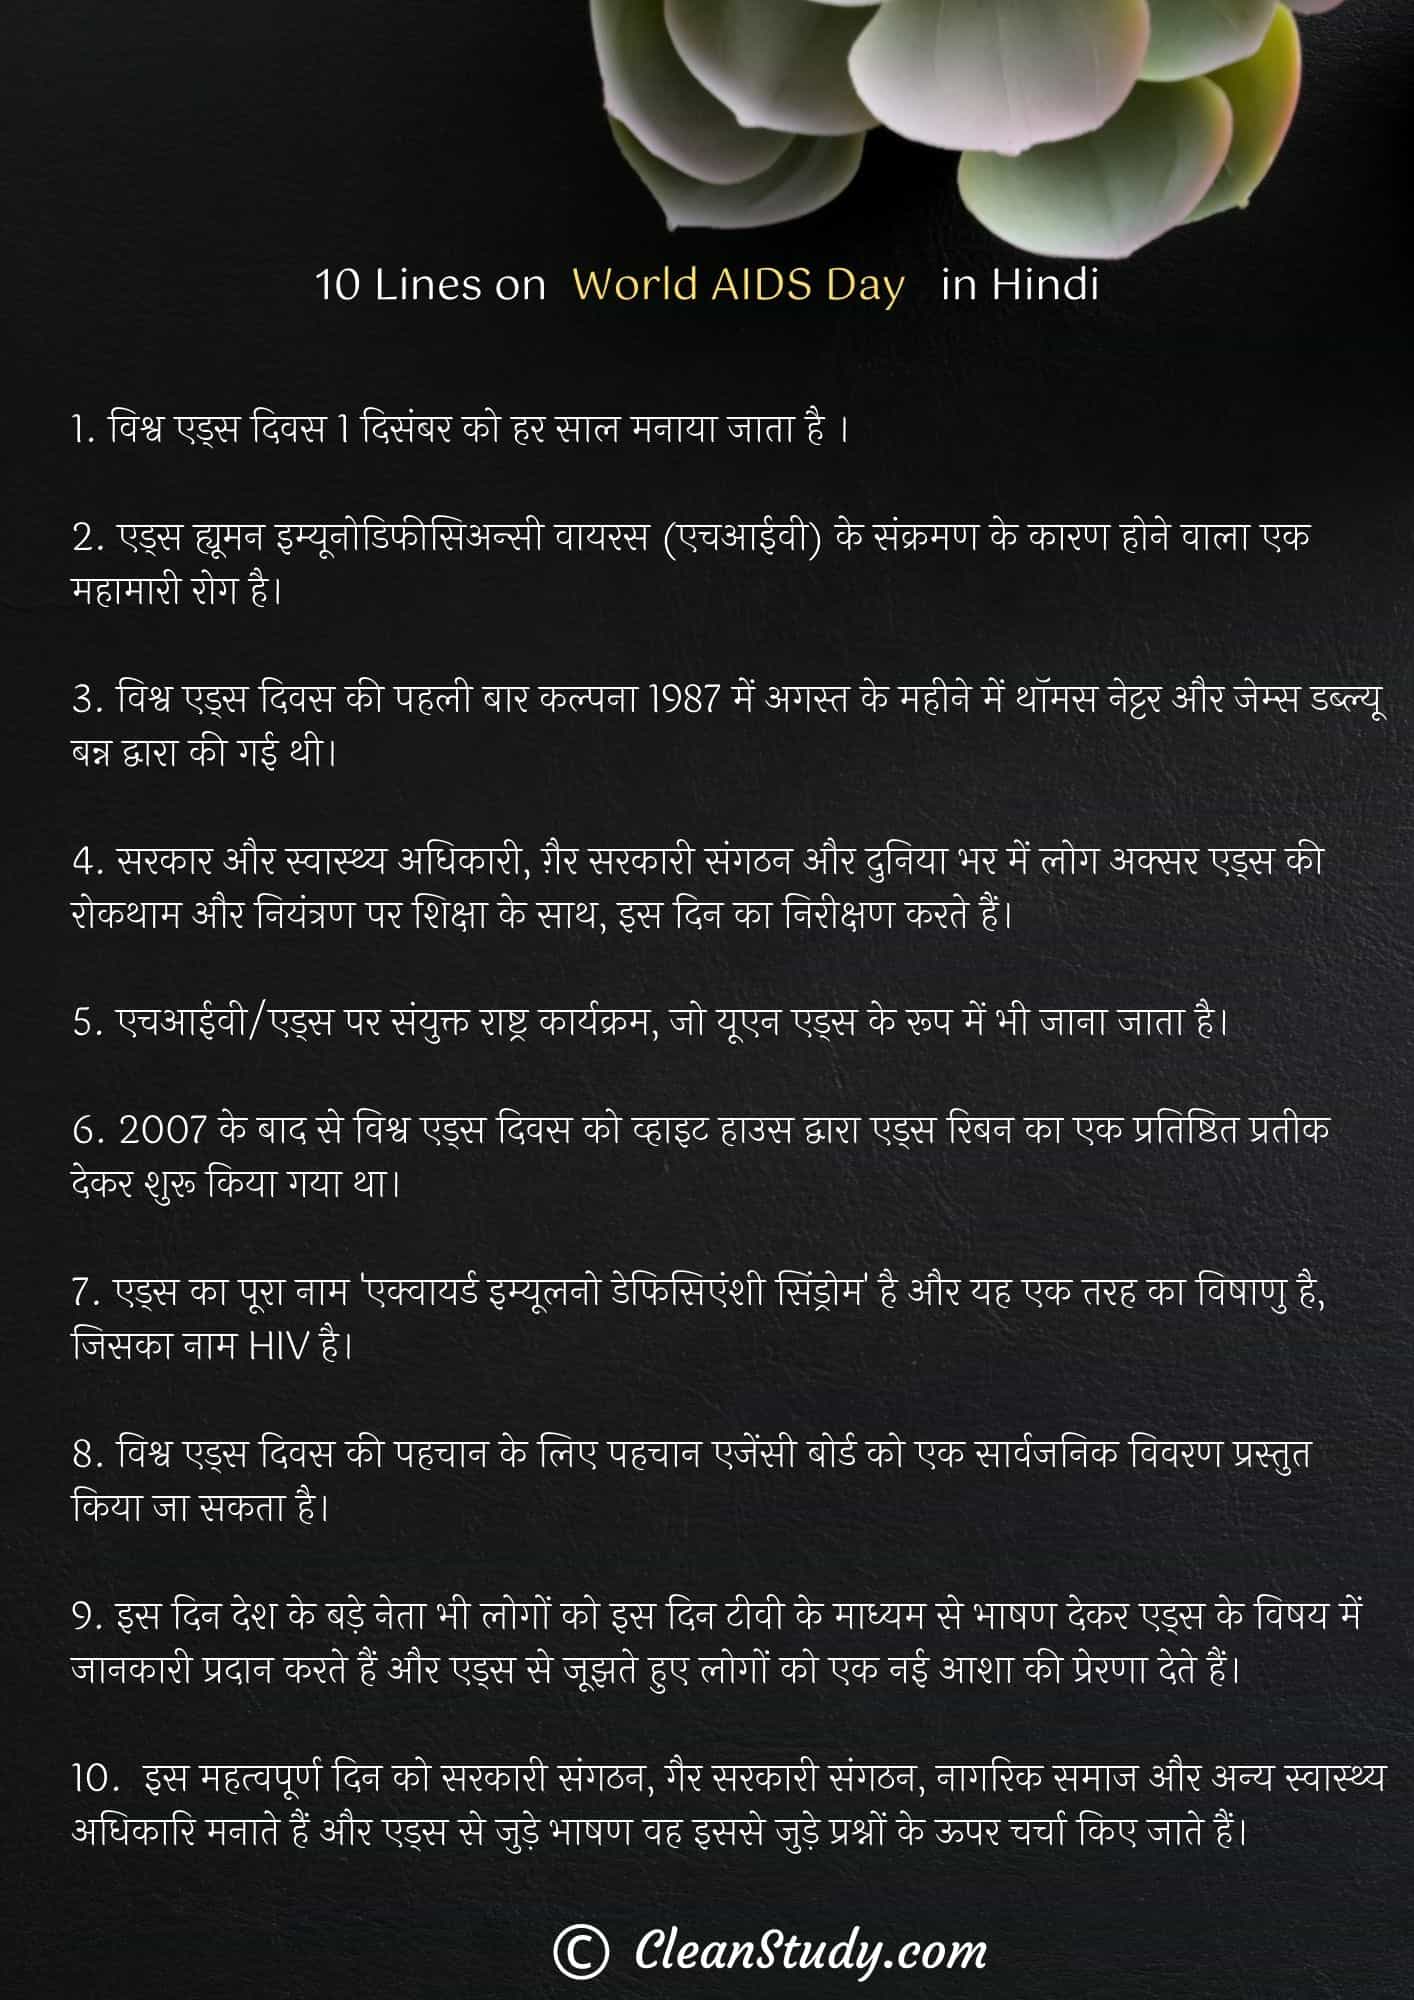 10 Lines on World AIDS Day in Hindi